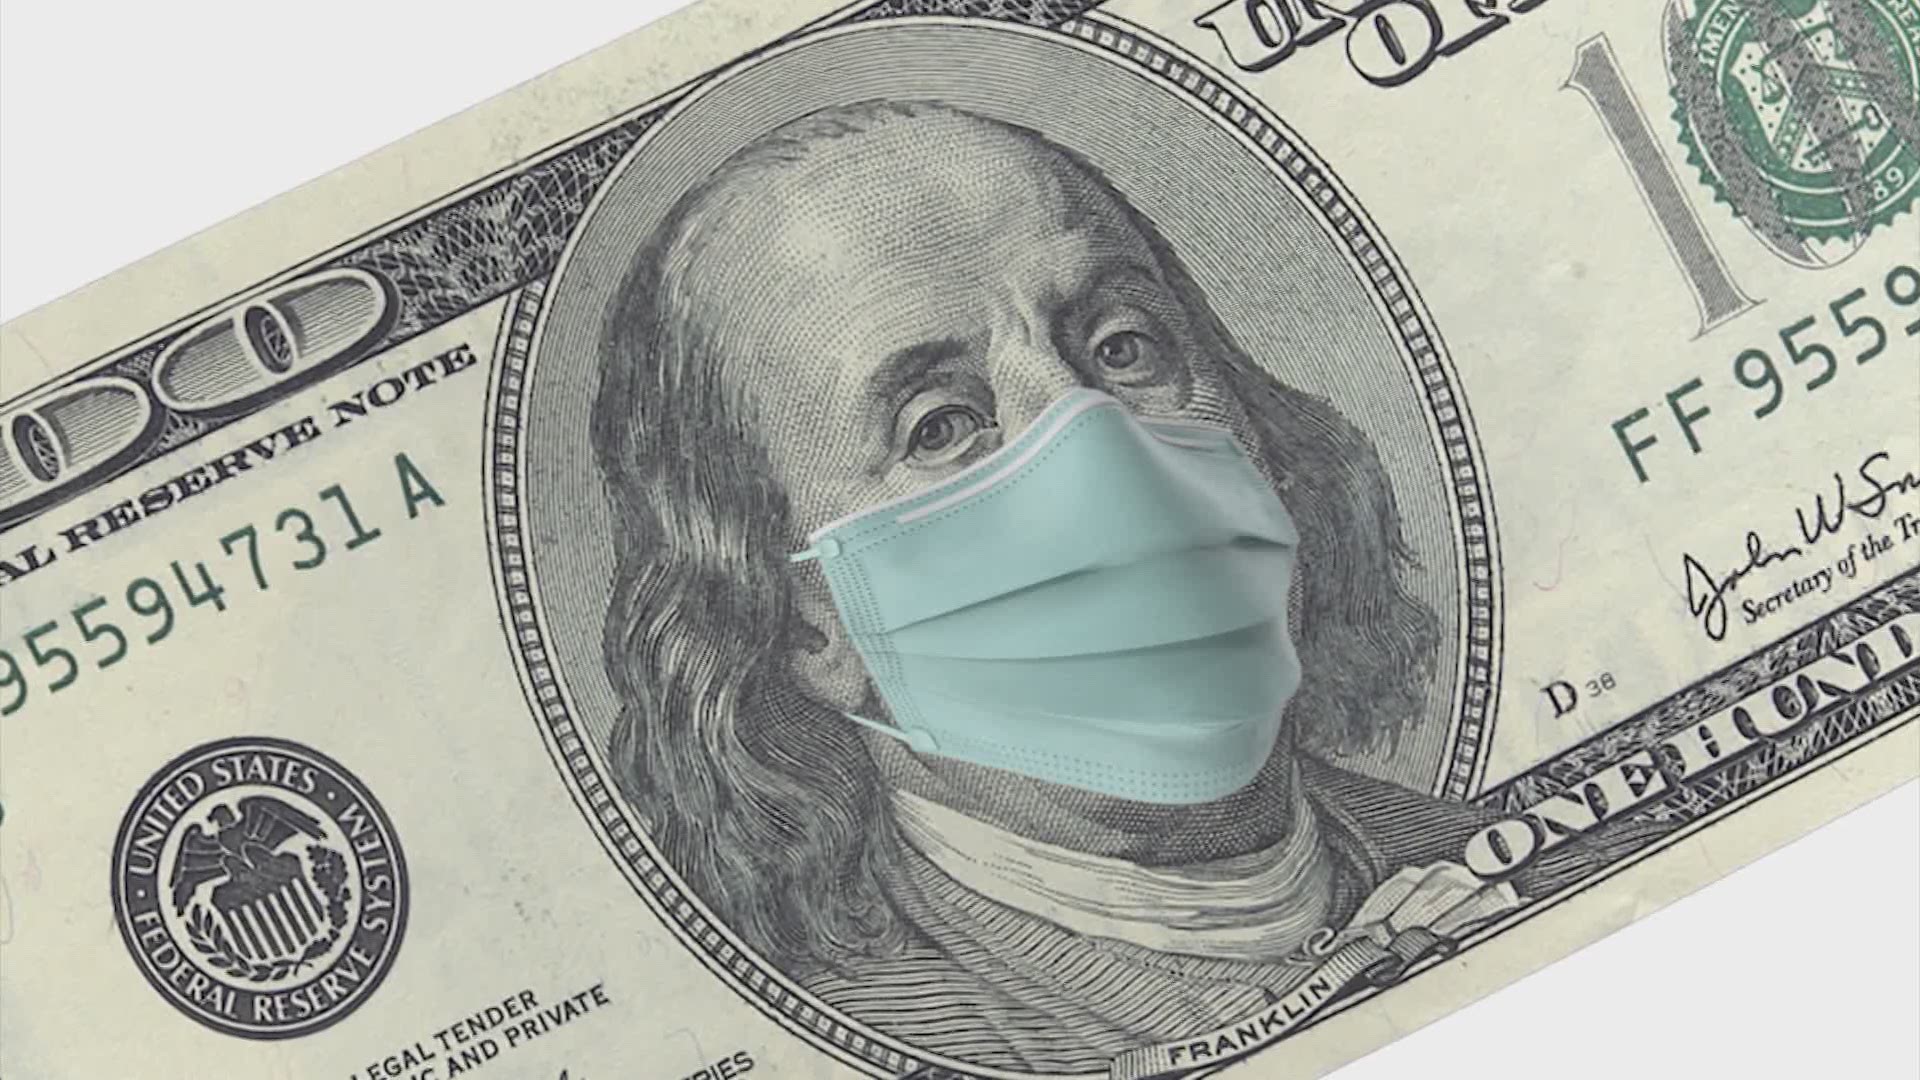 The city is considering a one-time, $1,200 payment for up to 23,750 Houstonians struggling during the COVID-19 pandemic.